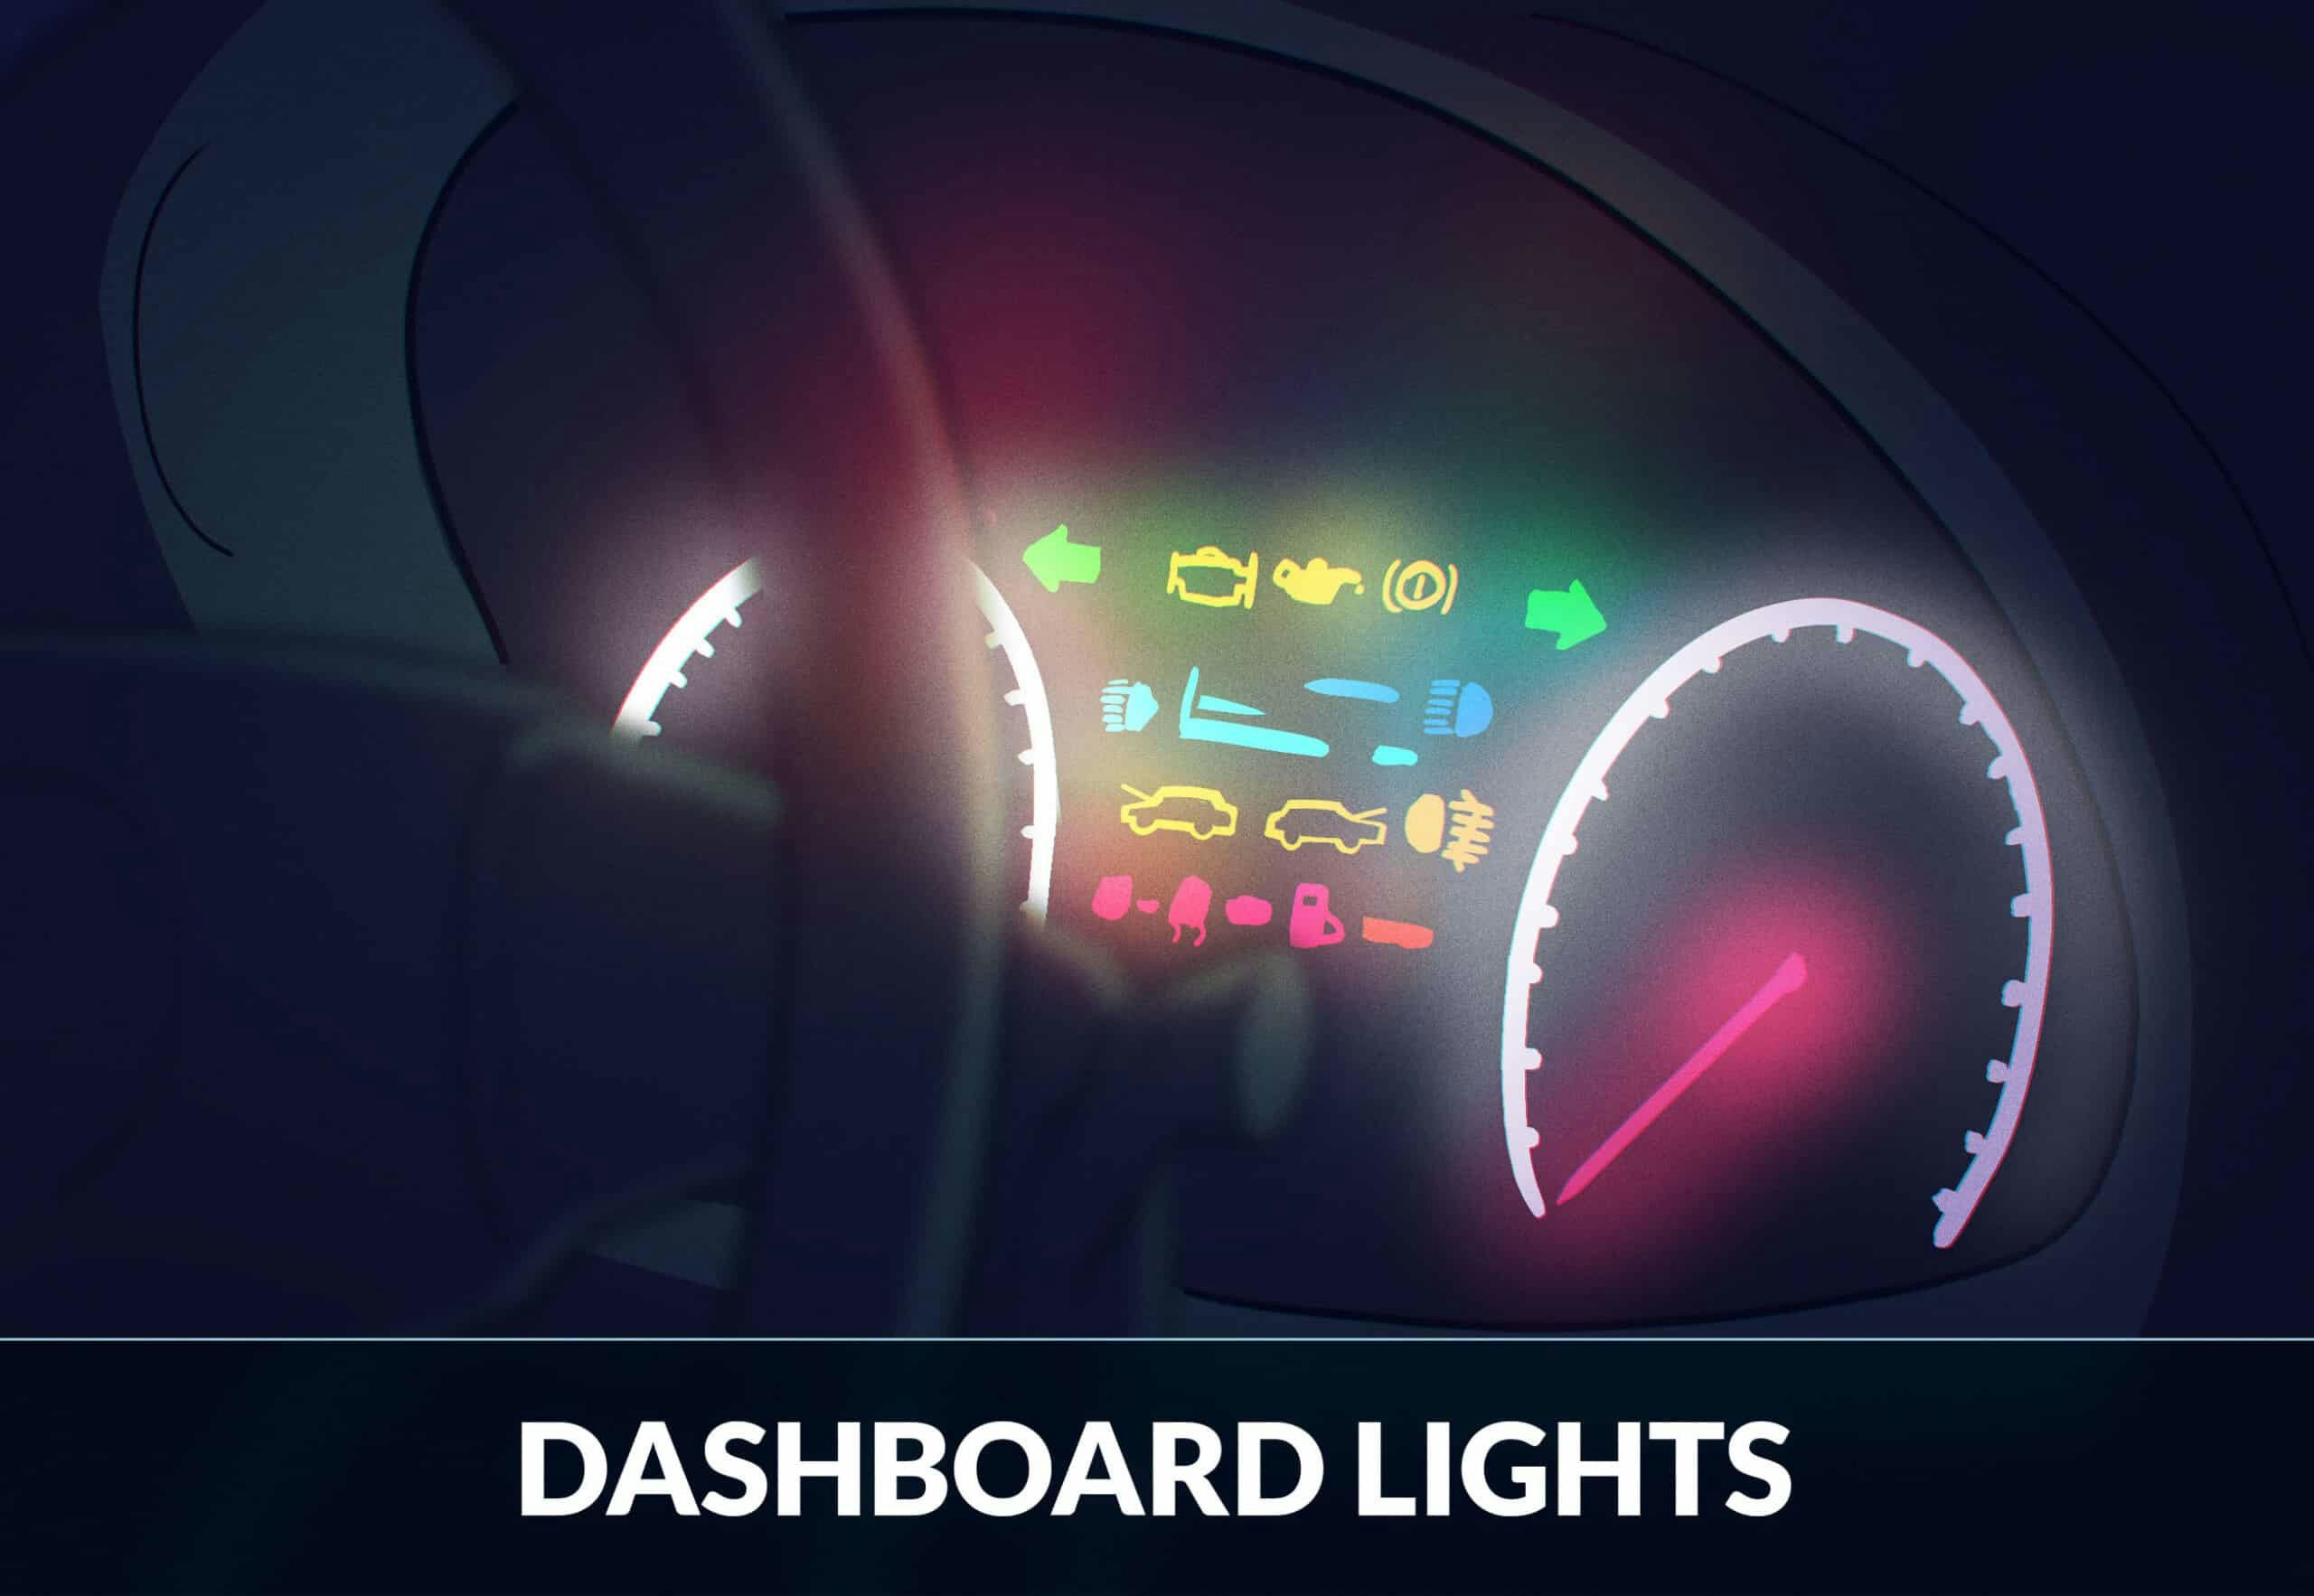 Car Warning Lights: Understanding Their Importance and Meaning